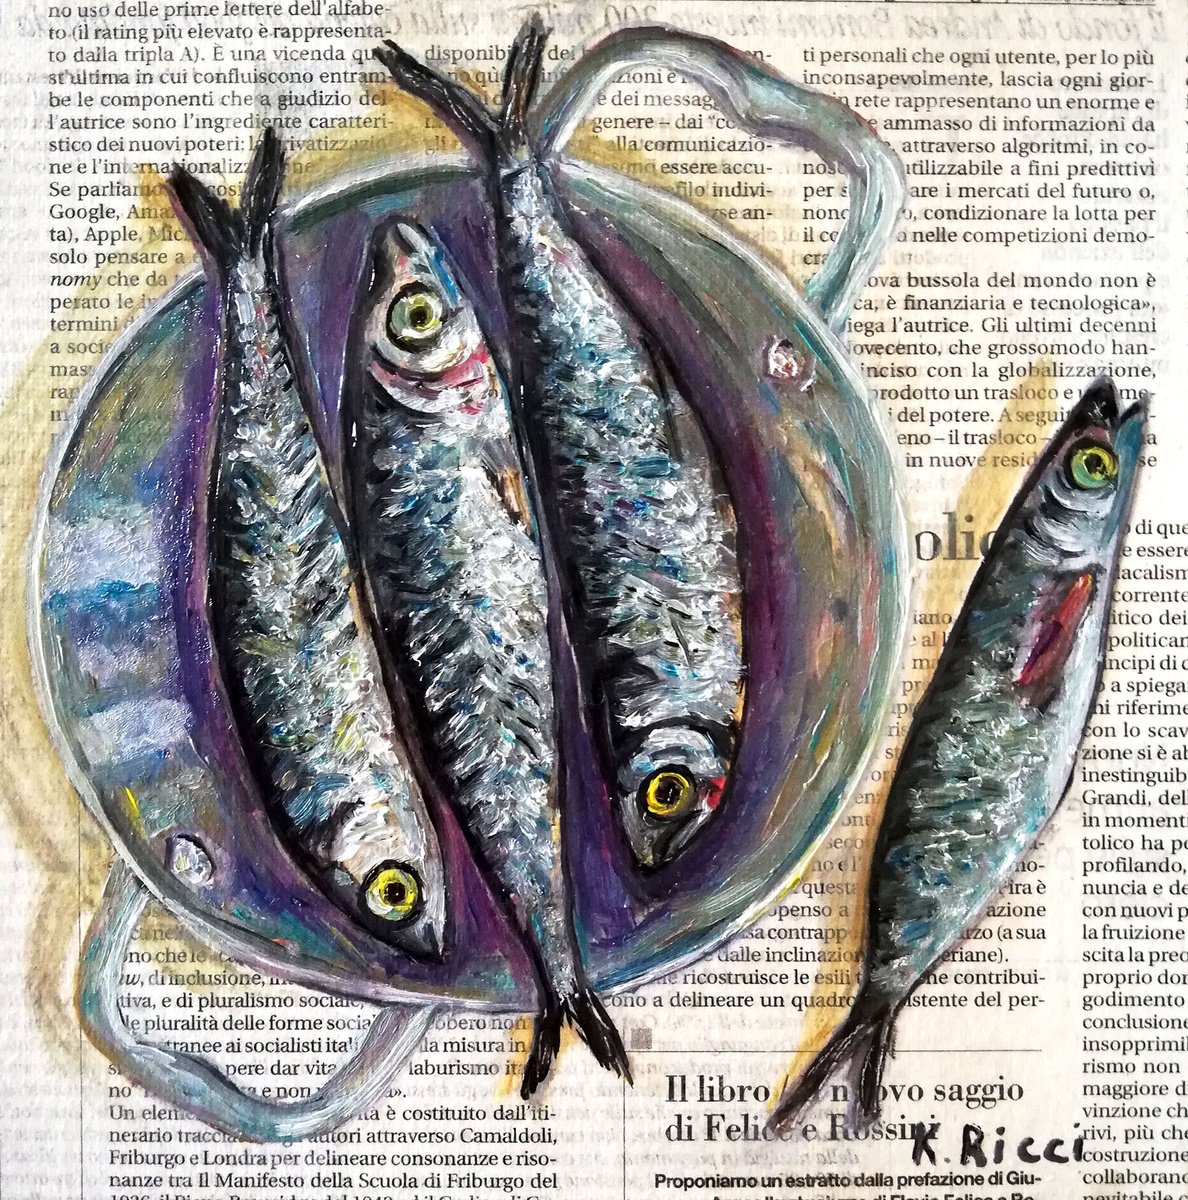 Fishes in a Pan on Newspaper Original Oil on Canvas Board Painting 8 by 8 inches (20x20... by Katia Ricci